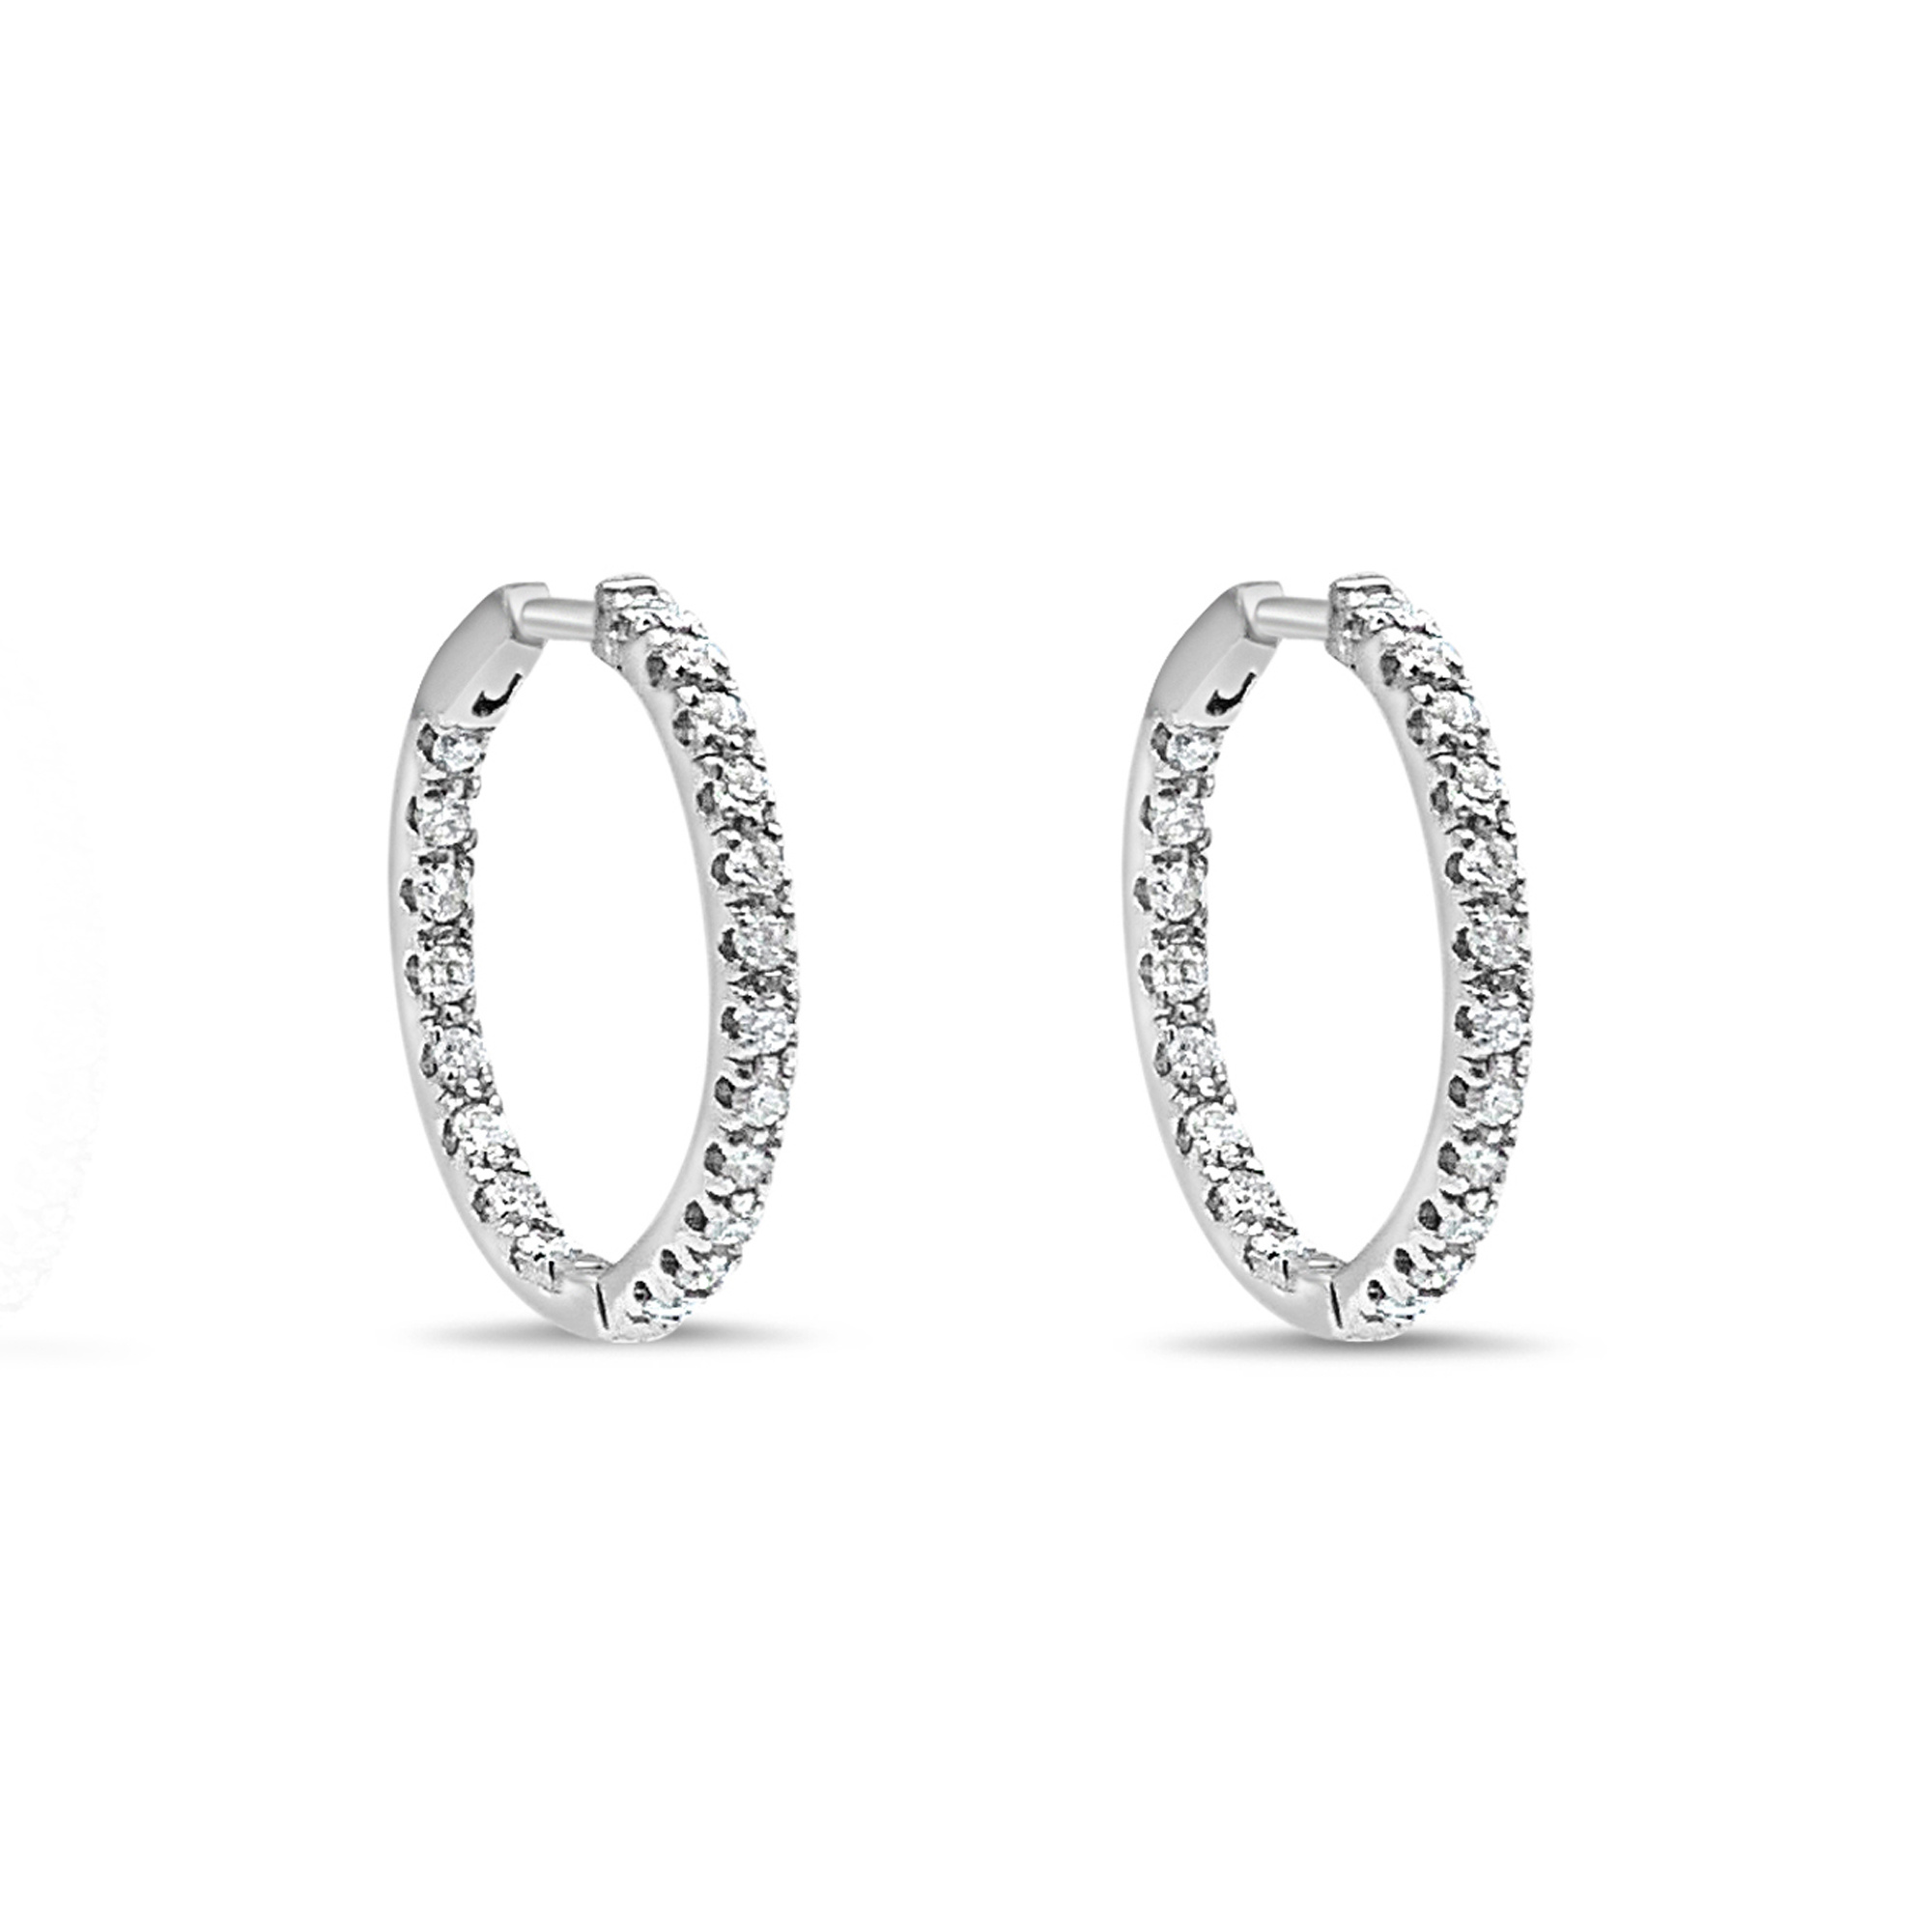 18k white gold earrings with 0,60ct diamonds